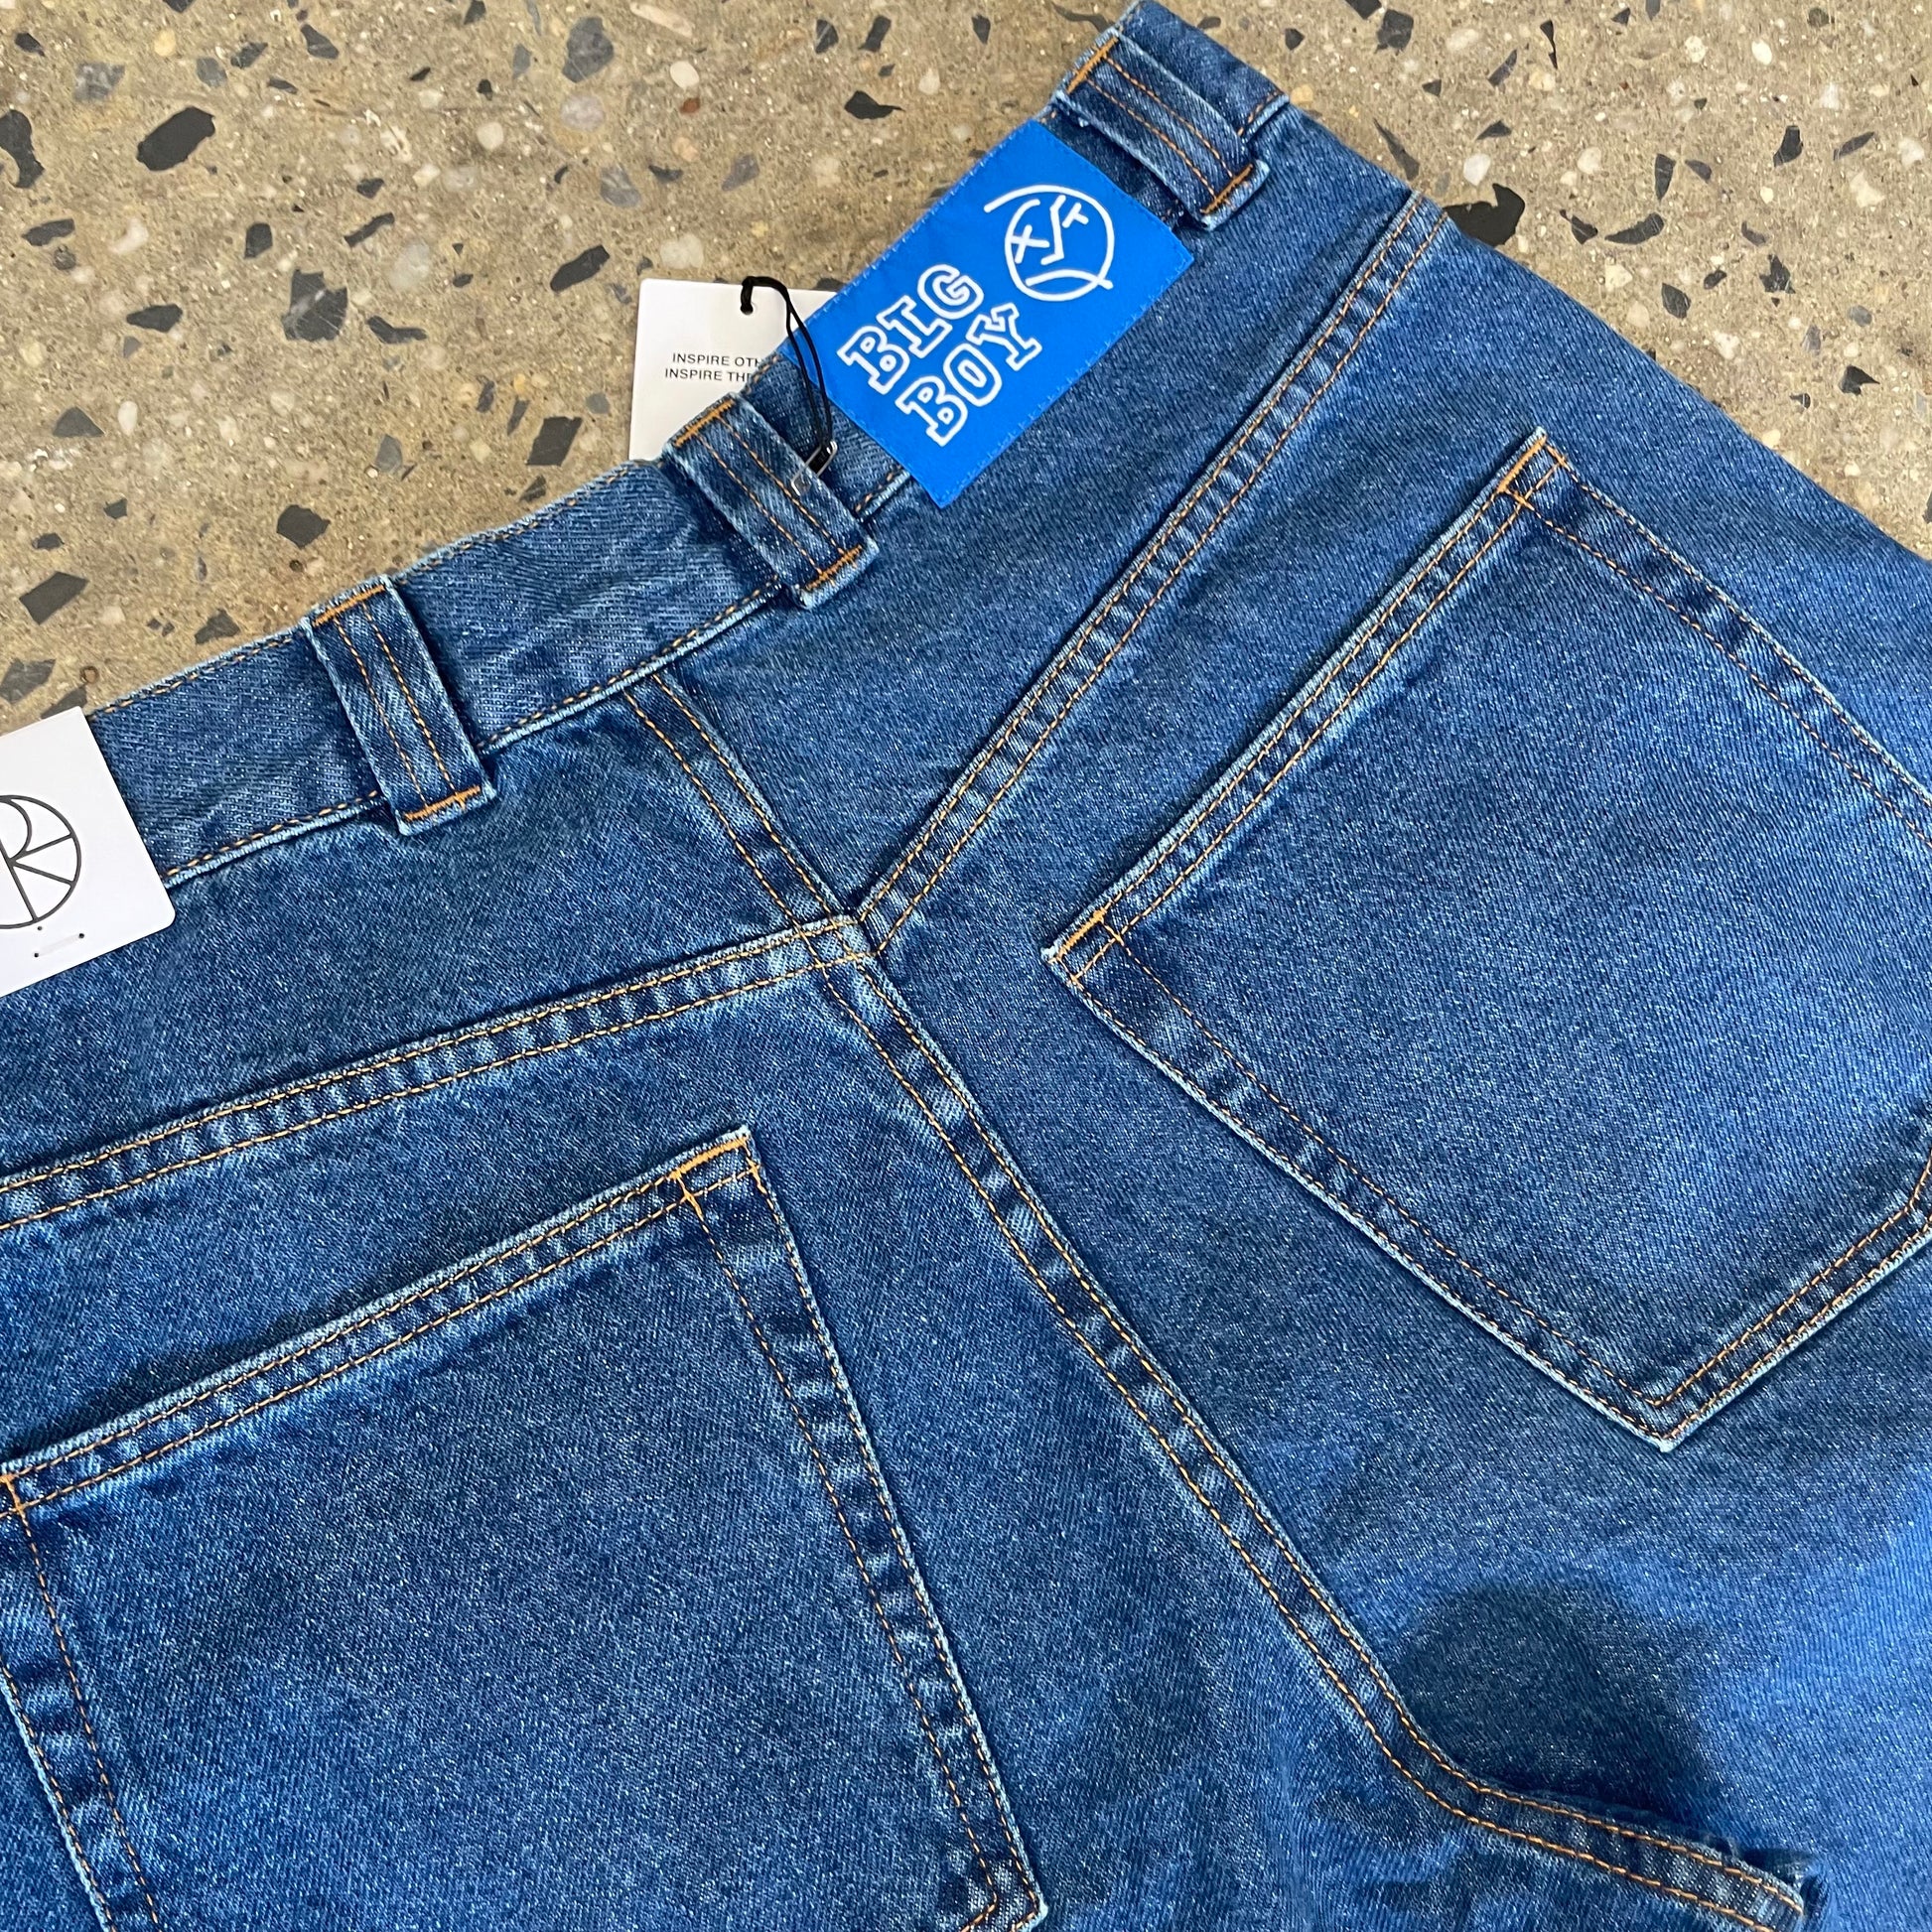 closeup of back pocket with blue patch logo